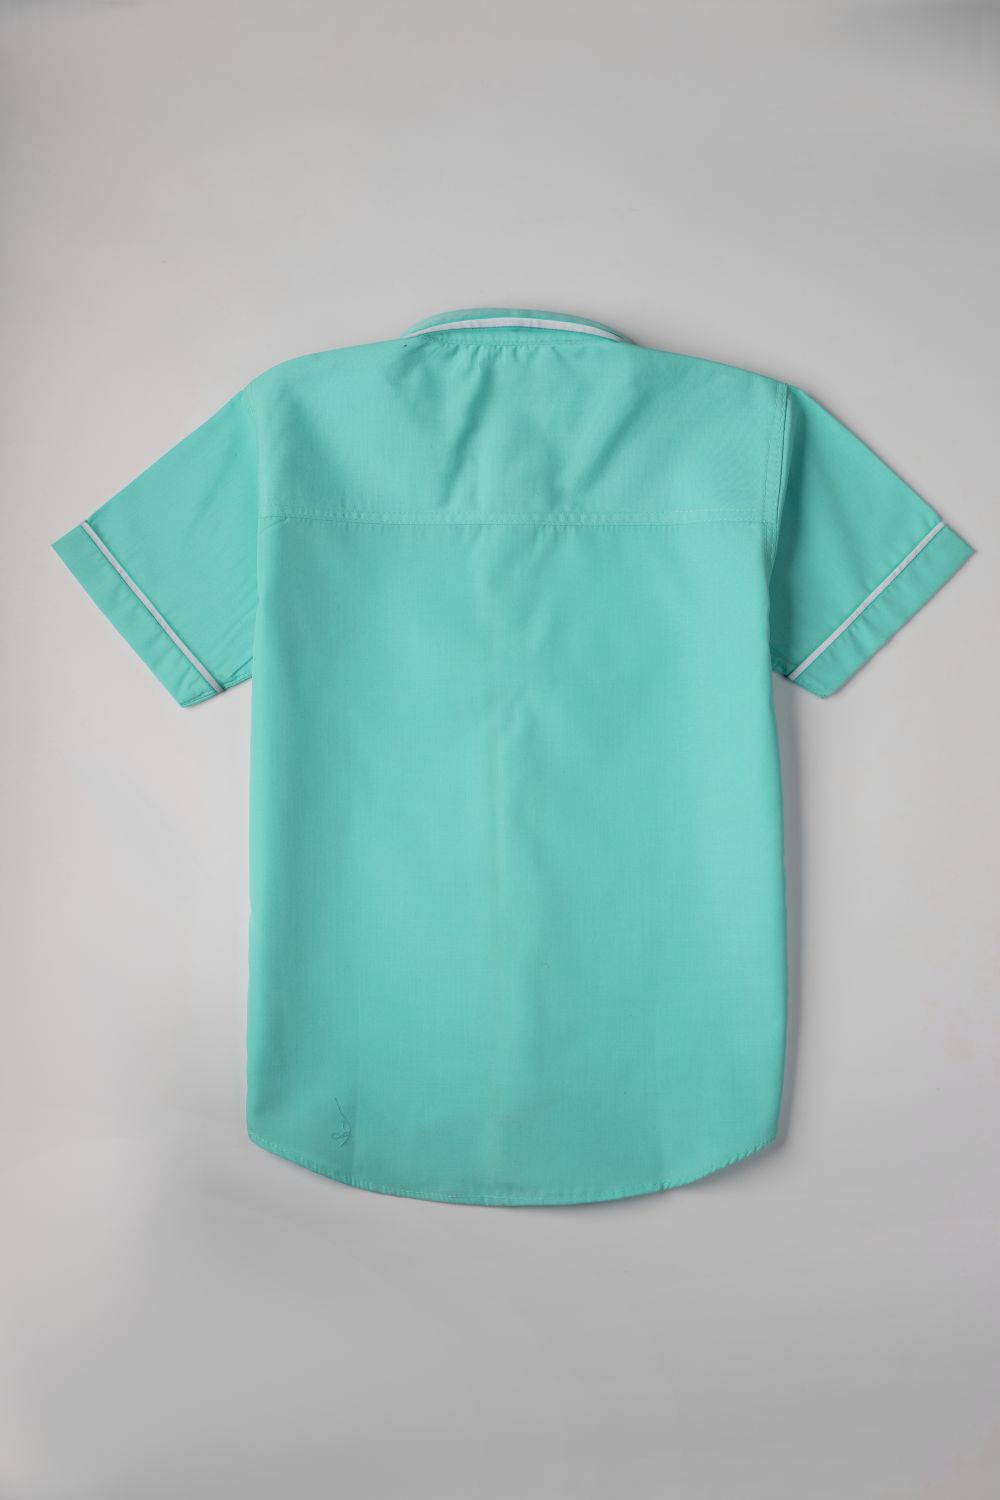 TIFFANY SHIRT WITH WHITE PIPPING